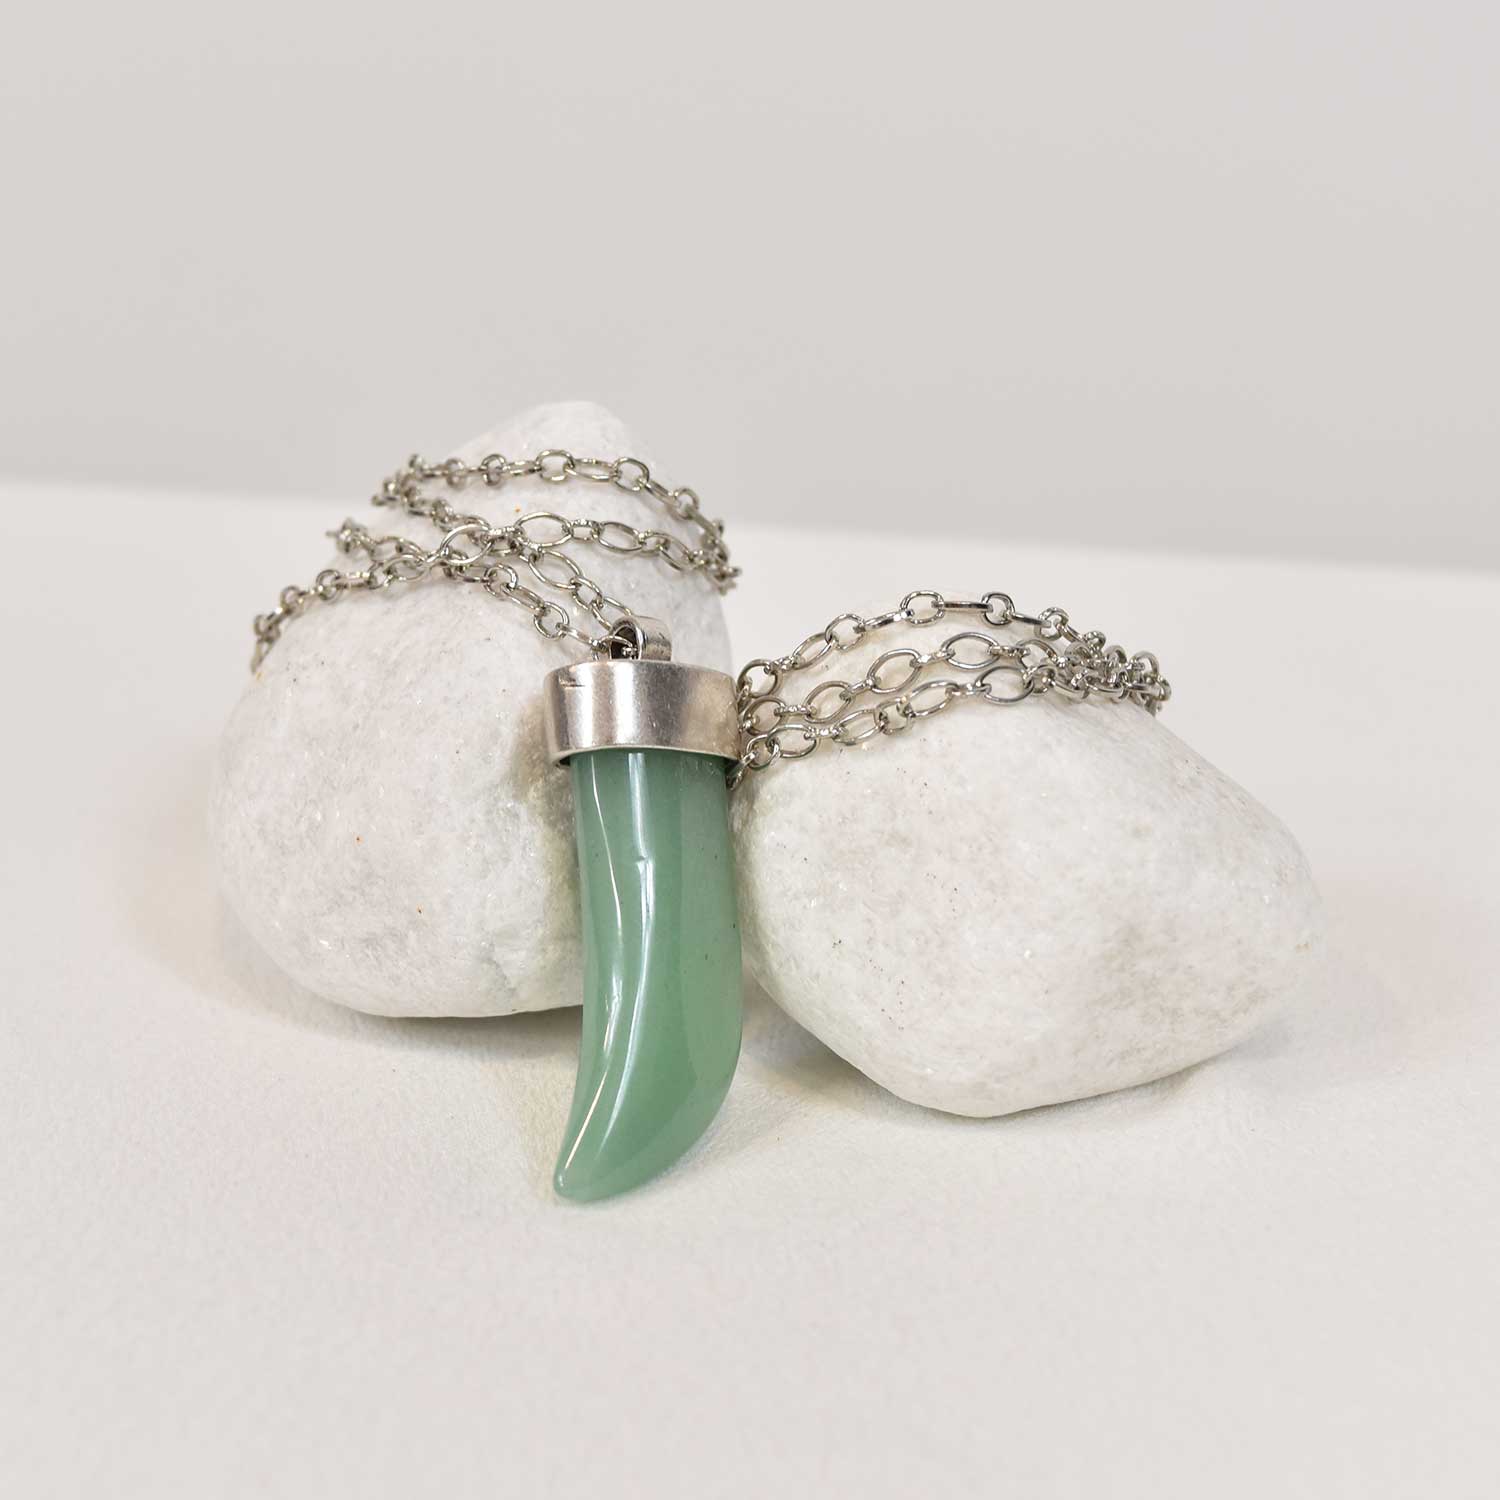 Green horn necklace